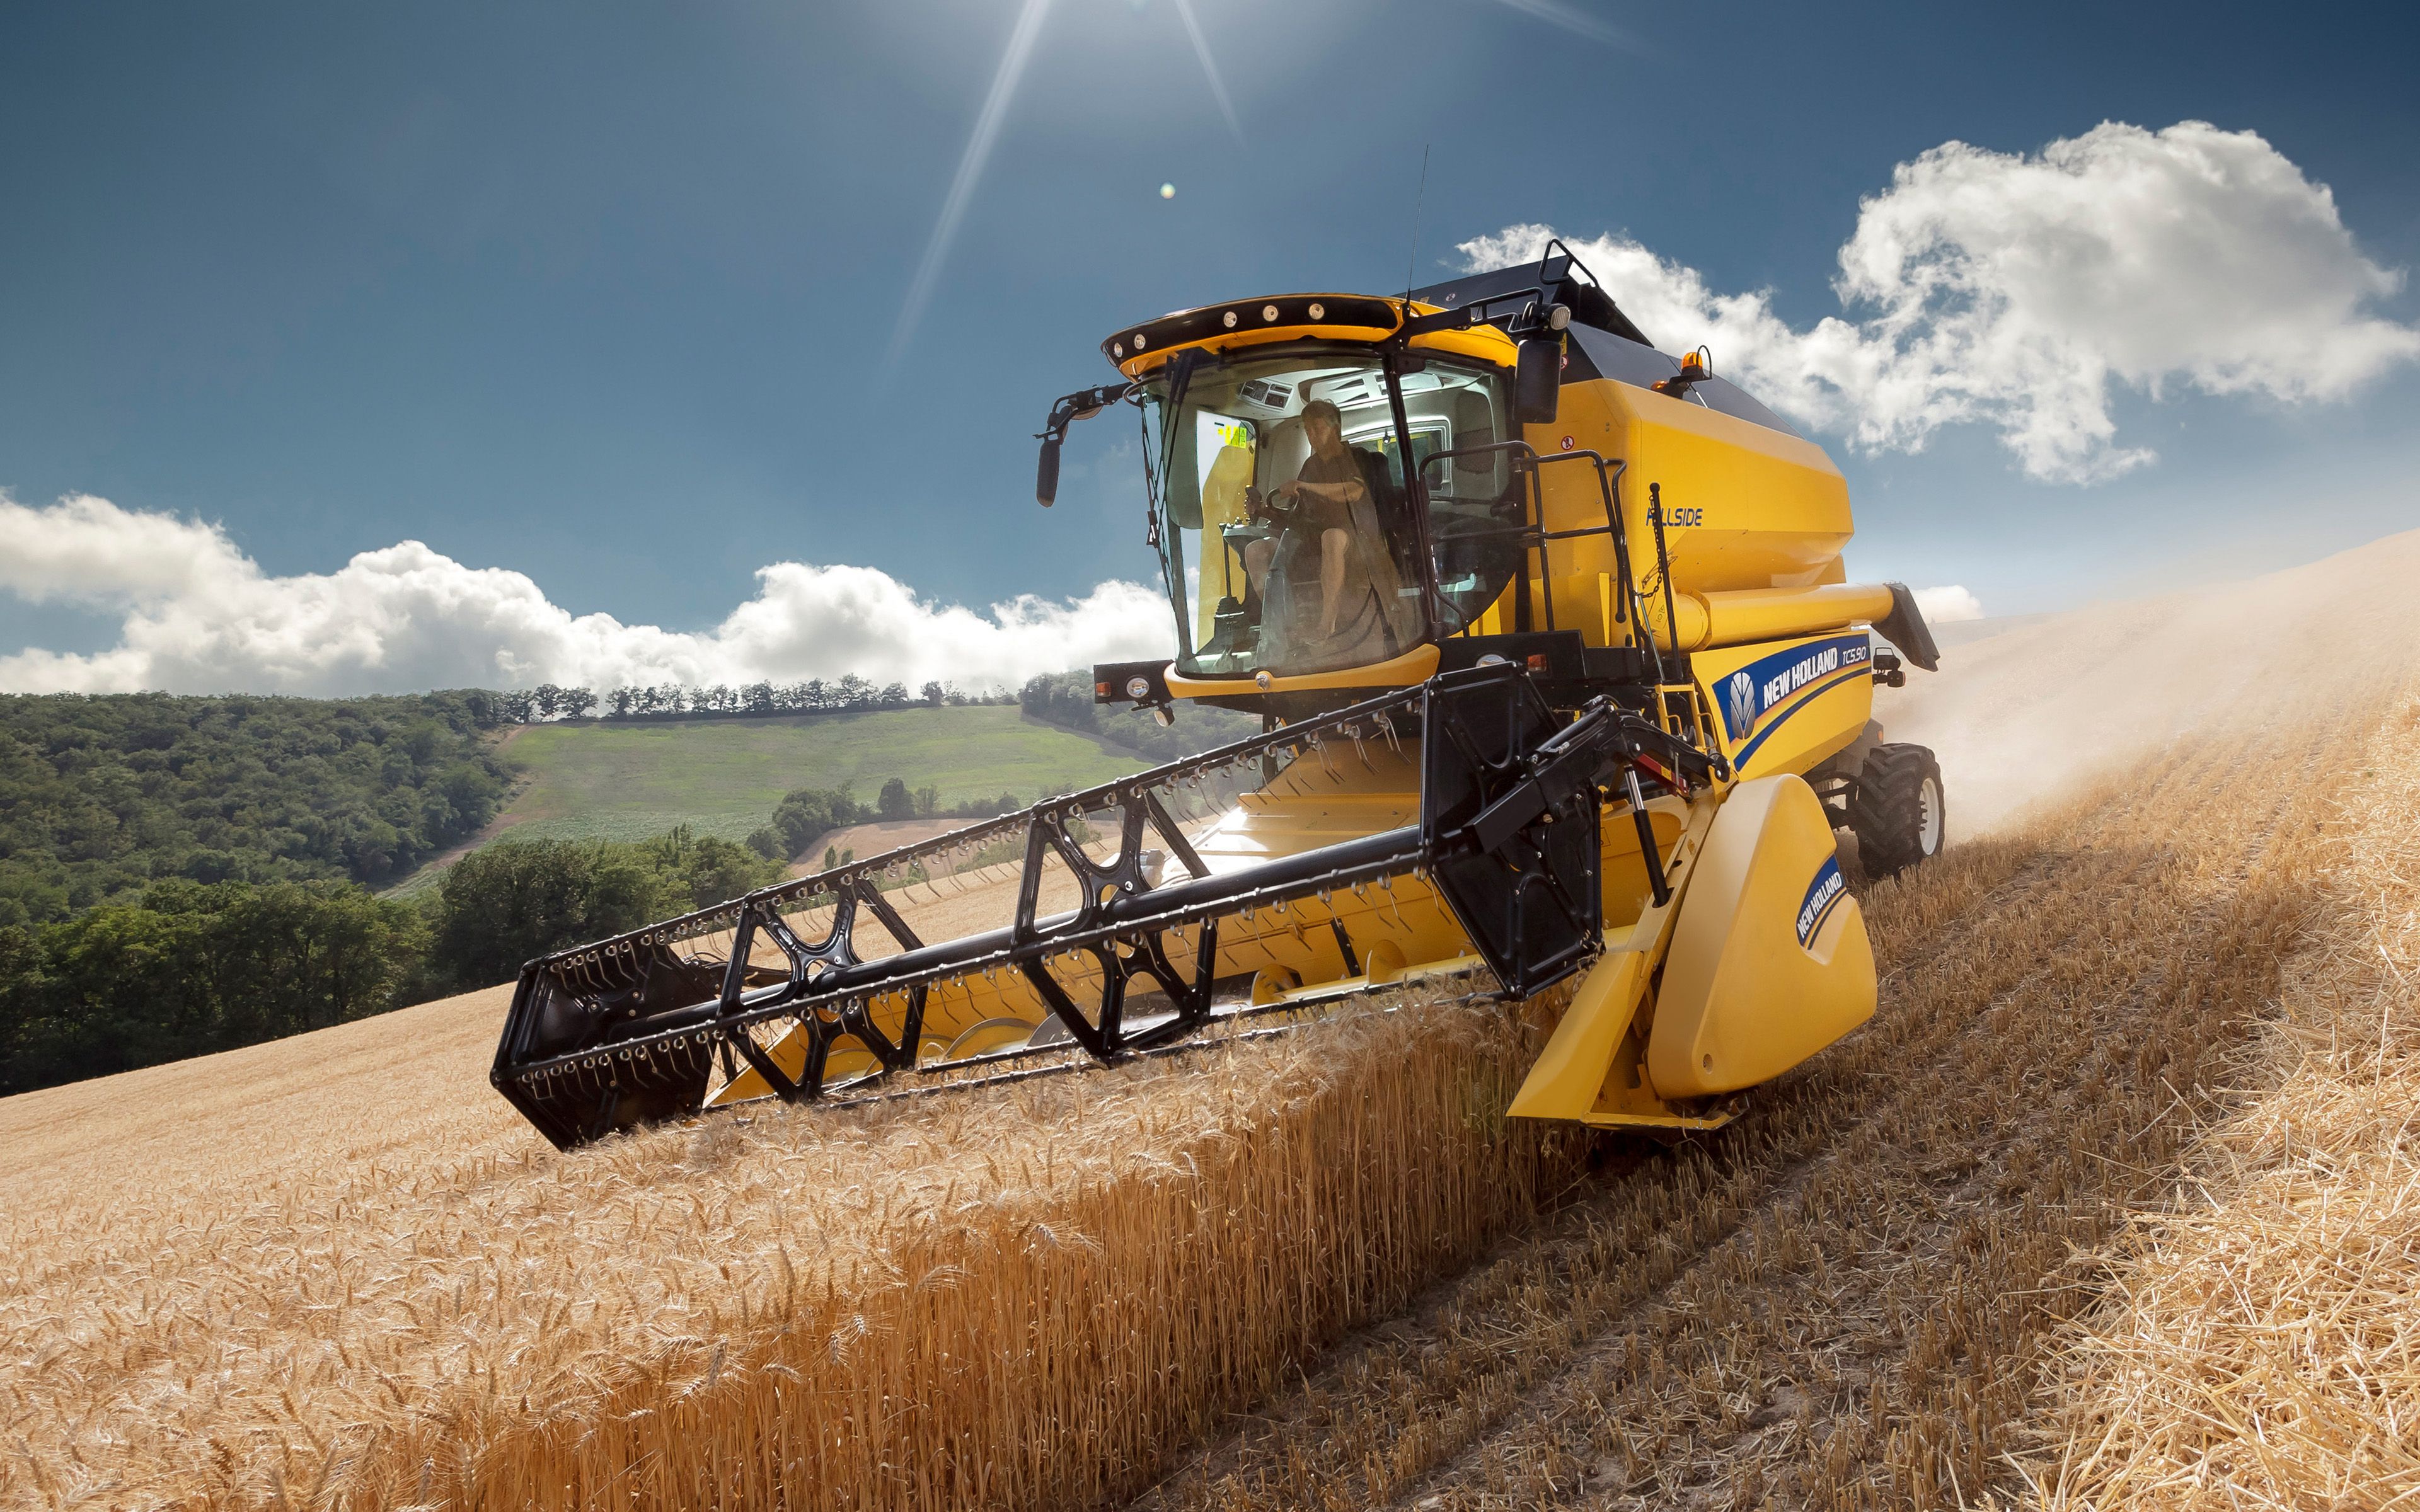 Download wallpaper 4k, New Holland TC5 90 Hillside, combine harvester, 2020 combines, wheat harvest, harvesting concepts, New Holland for desktop with resolution 3840x2400. High Quality HD picture wallpaper